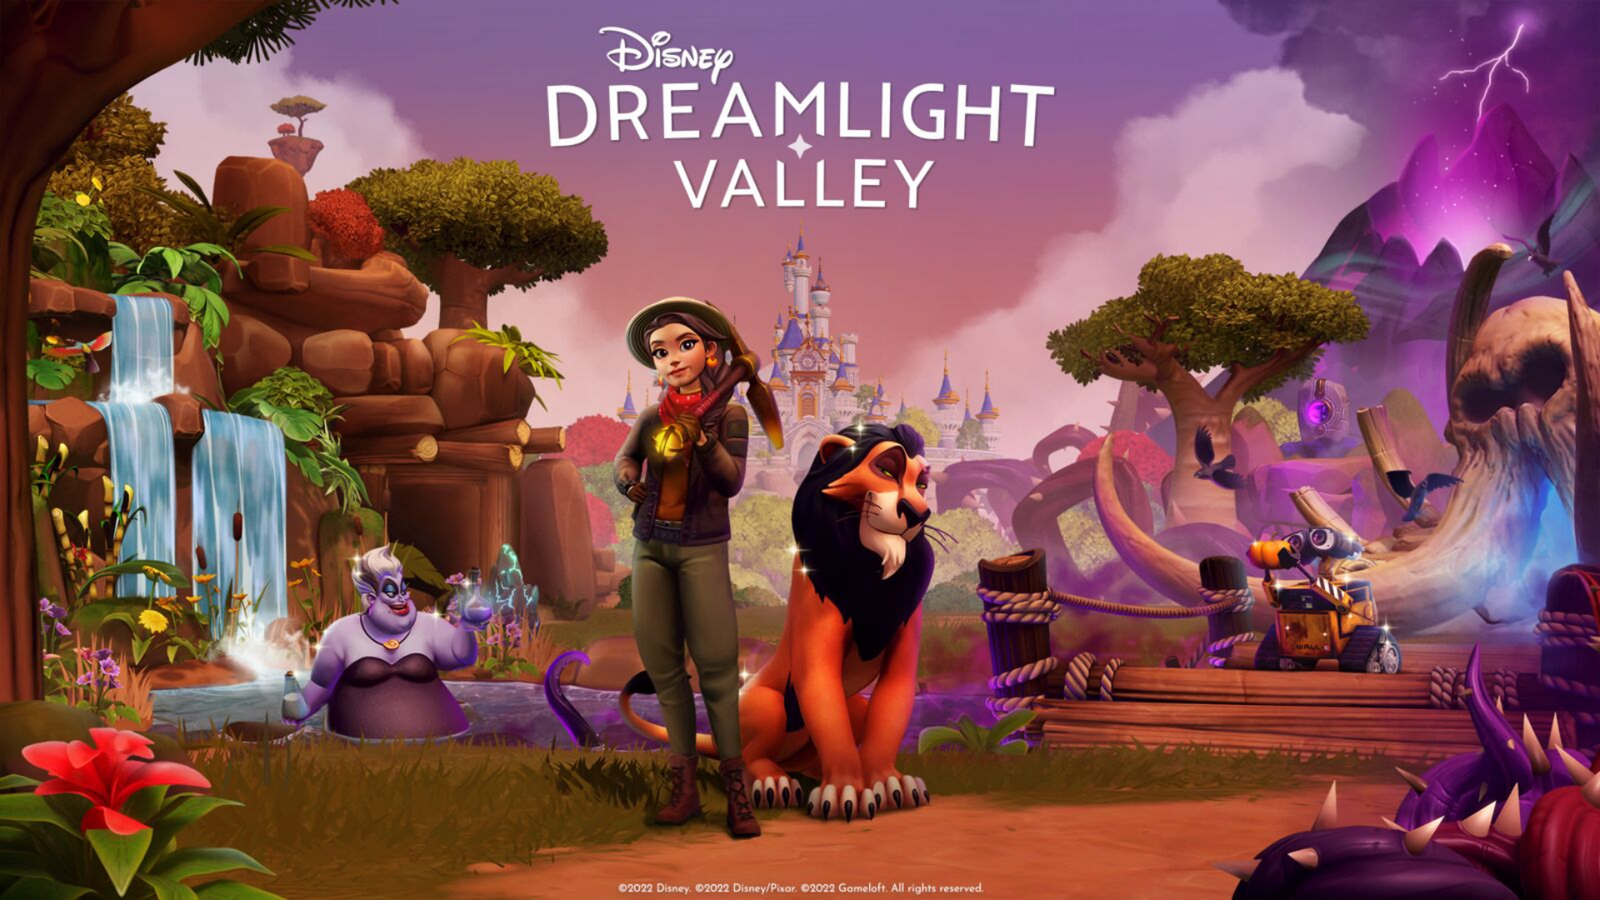 Disney Dreamlight Valley comes to Game Pass with Metal: Hellsinger